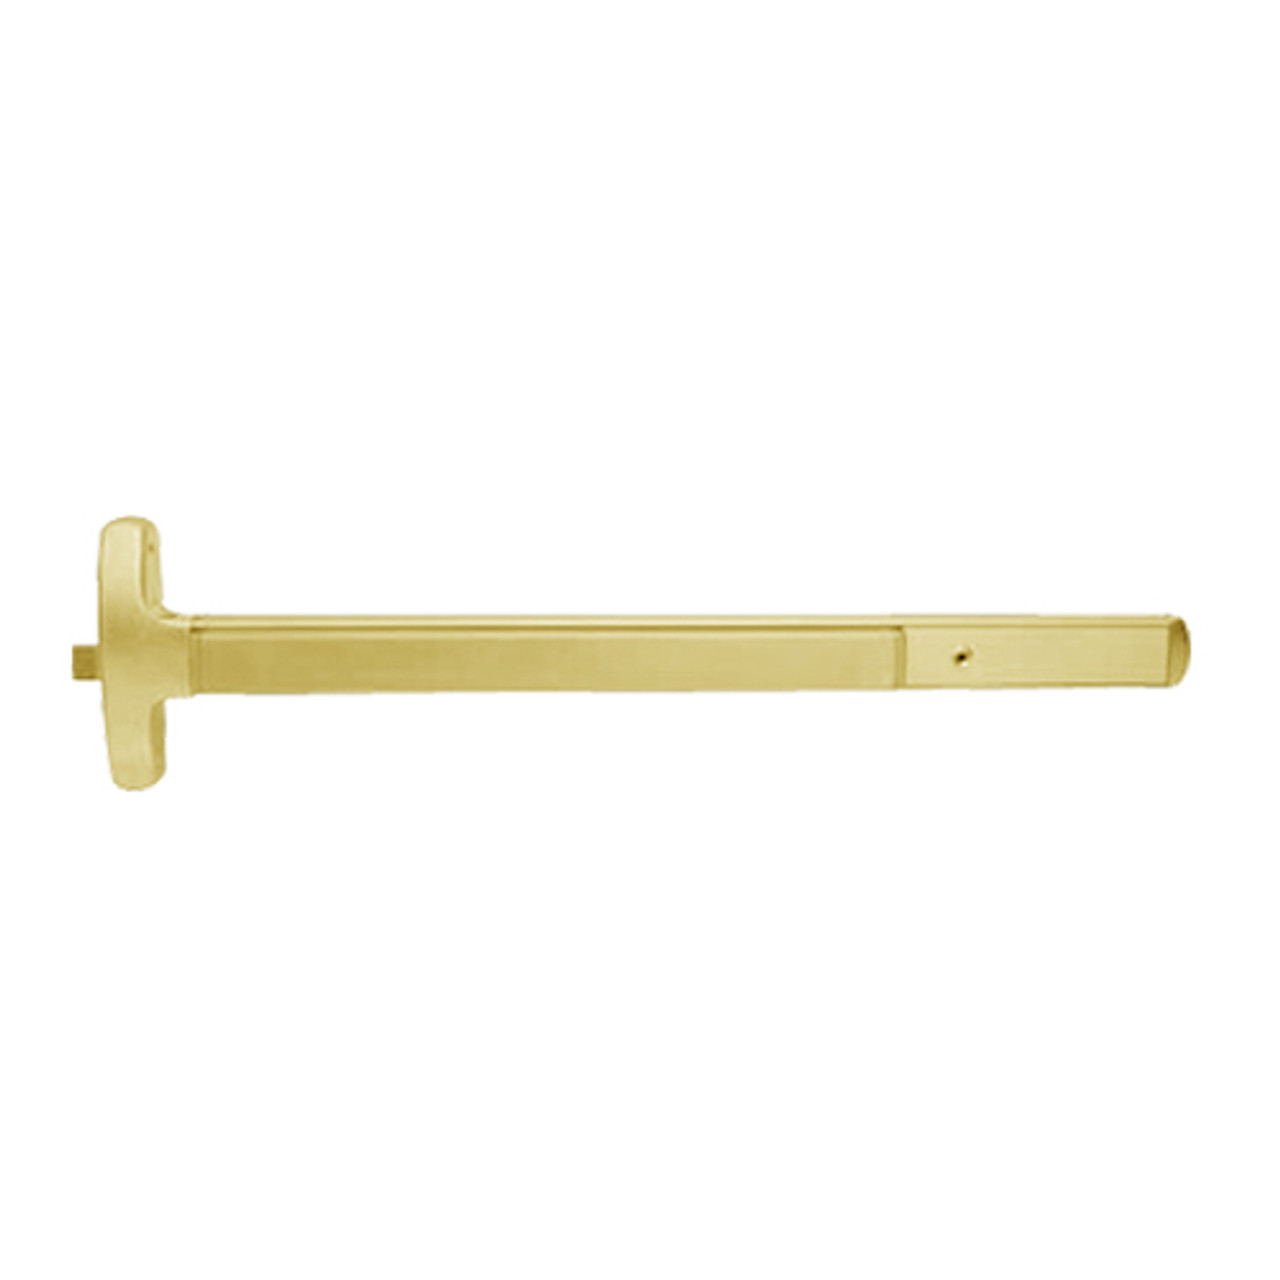 24-R-EO-US3-3 Falcon Exit Device in Polished Brass